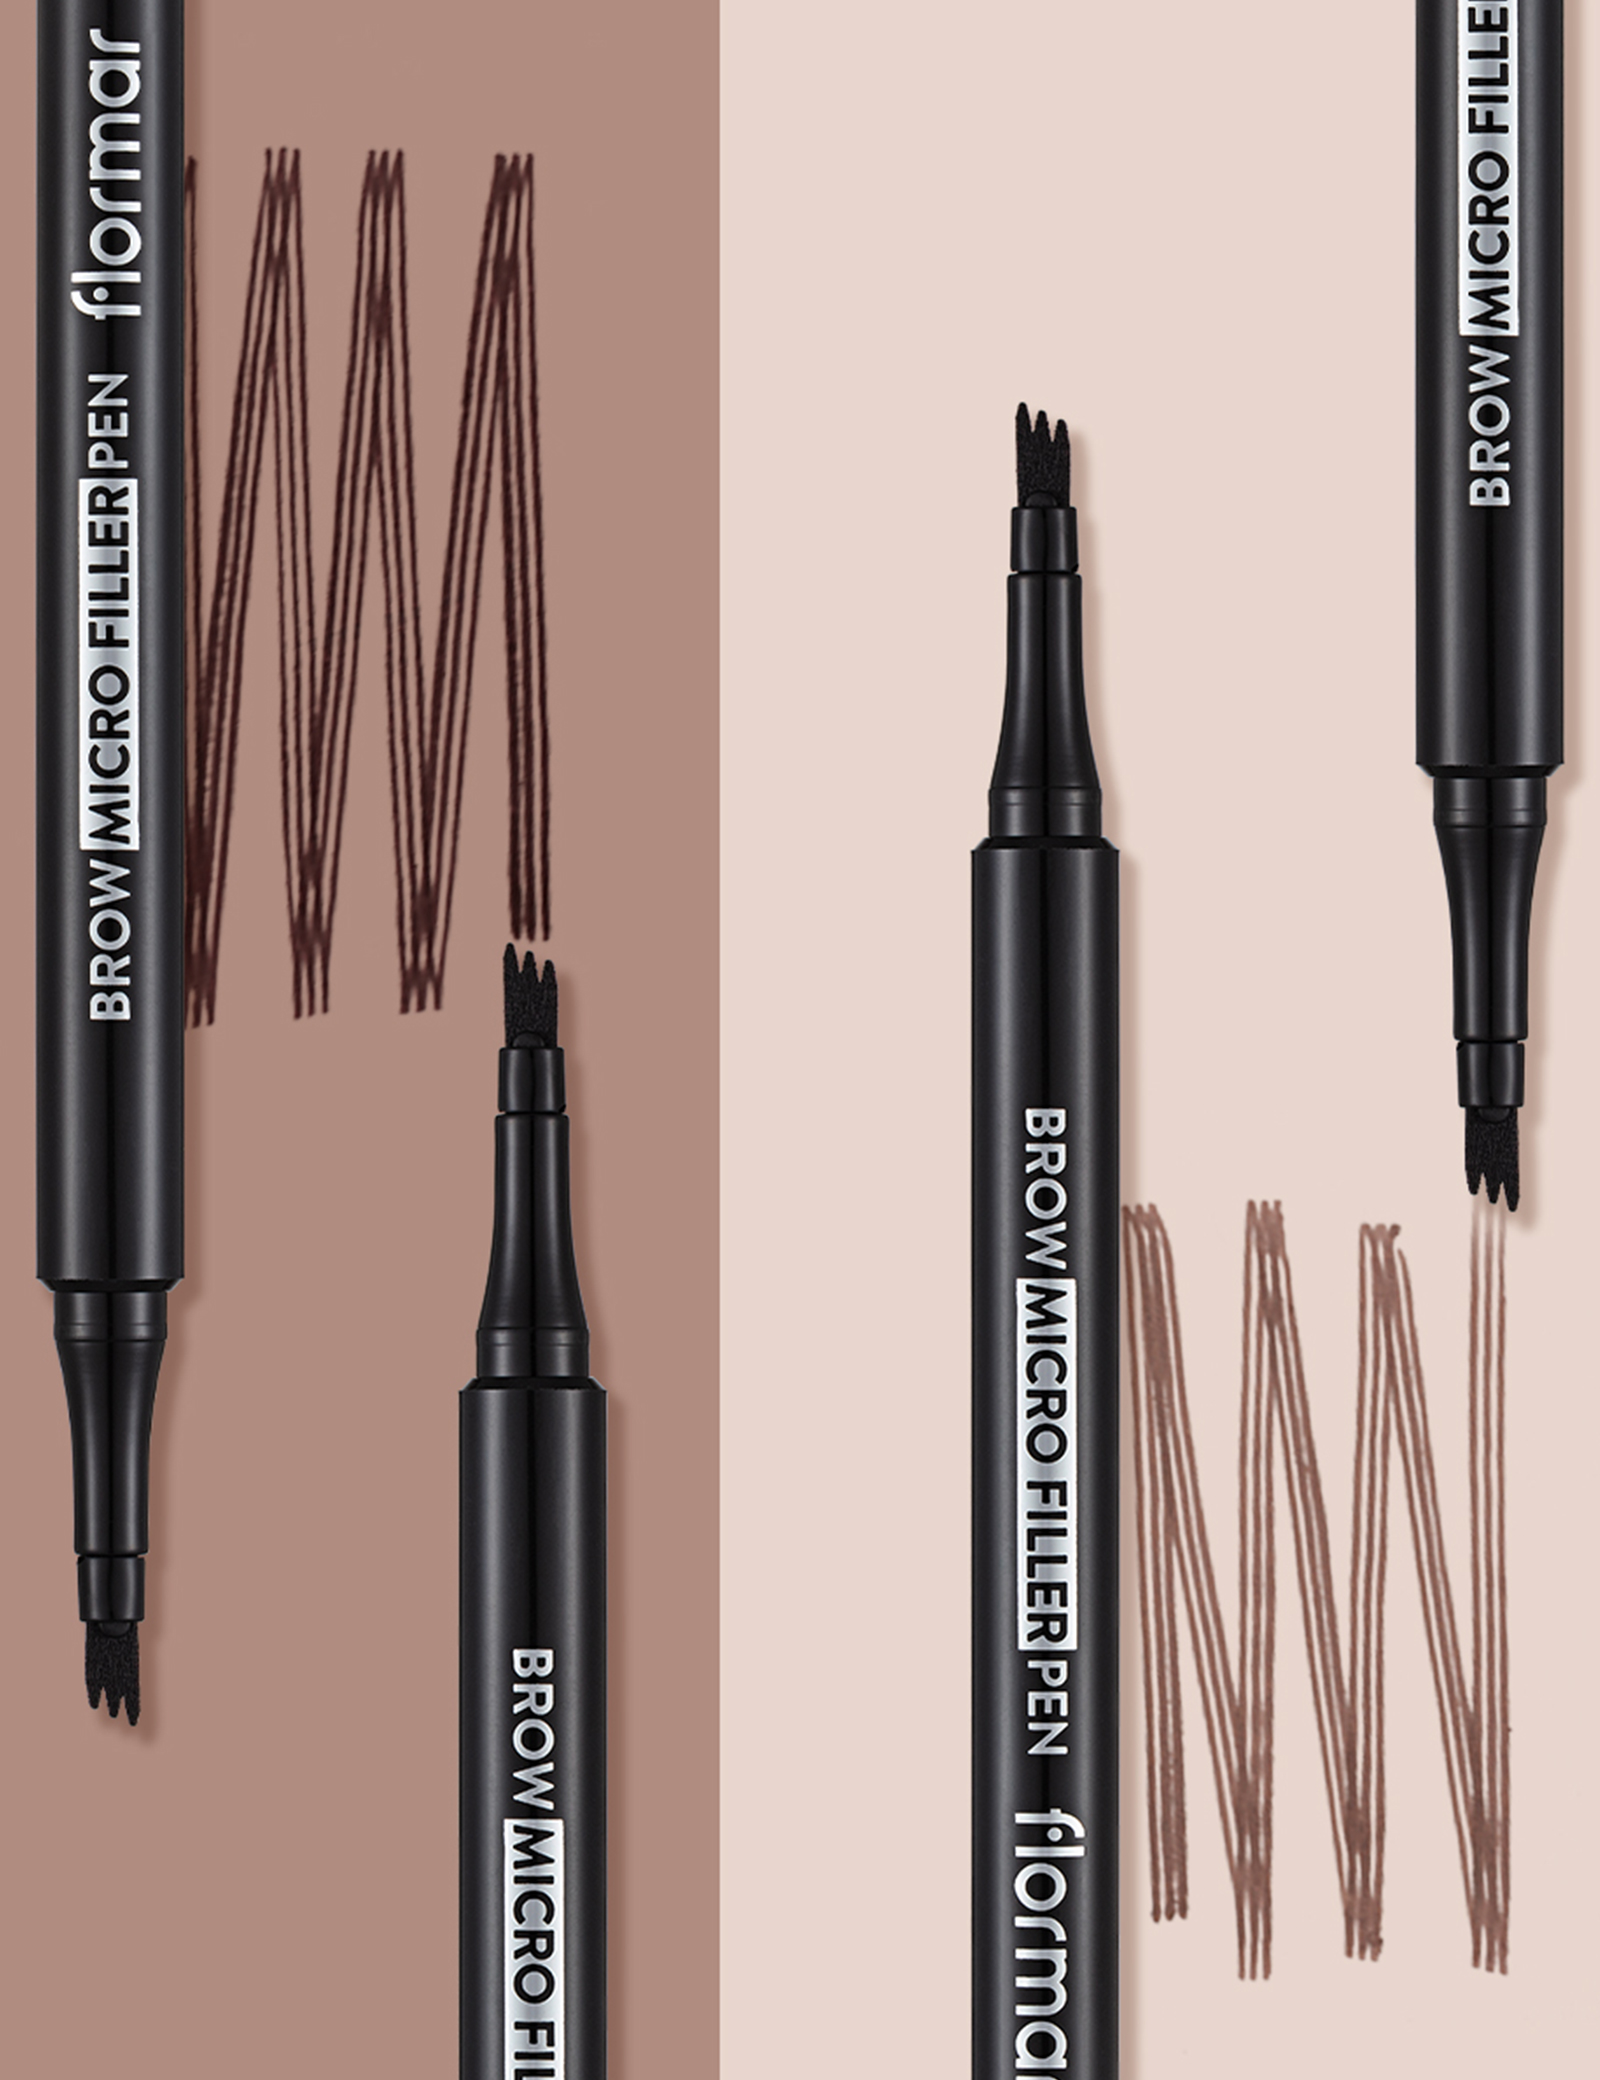 New Micro Eyebrow Filler Pencil - Brown 03 from Flormar